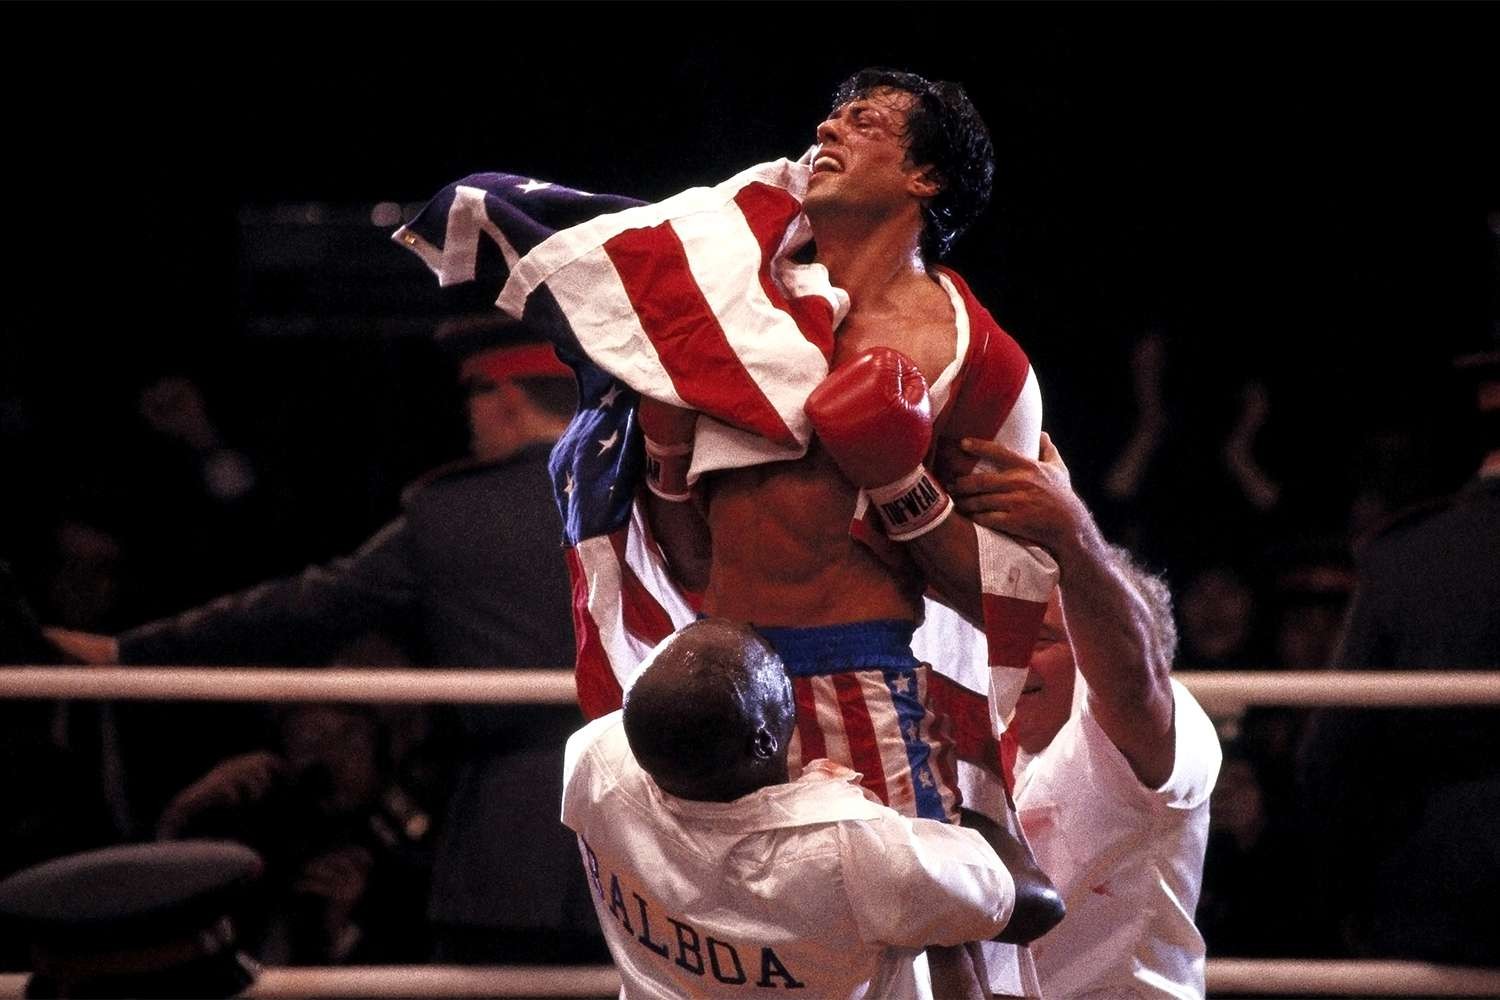 Sylvester Stallone in a still from the Rocky franchise